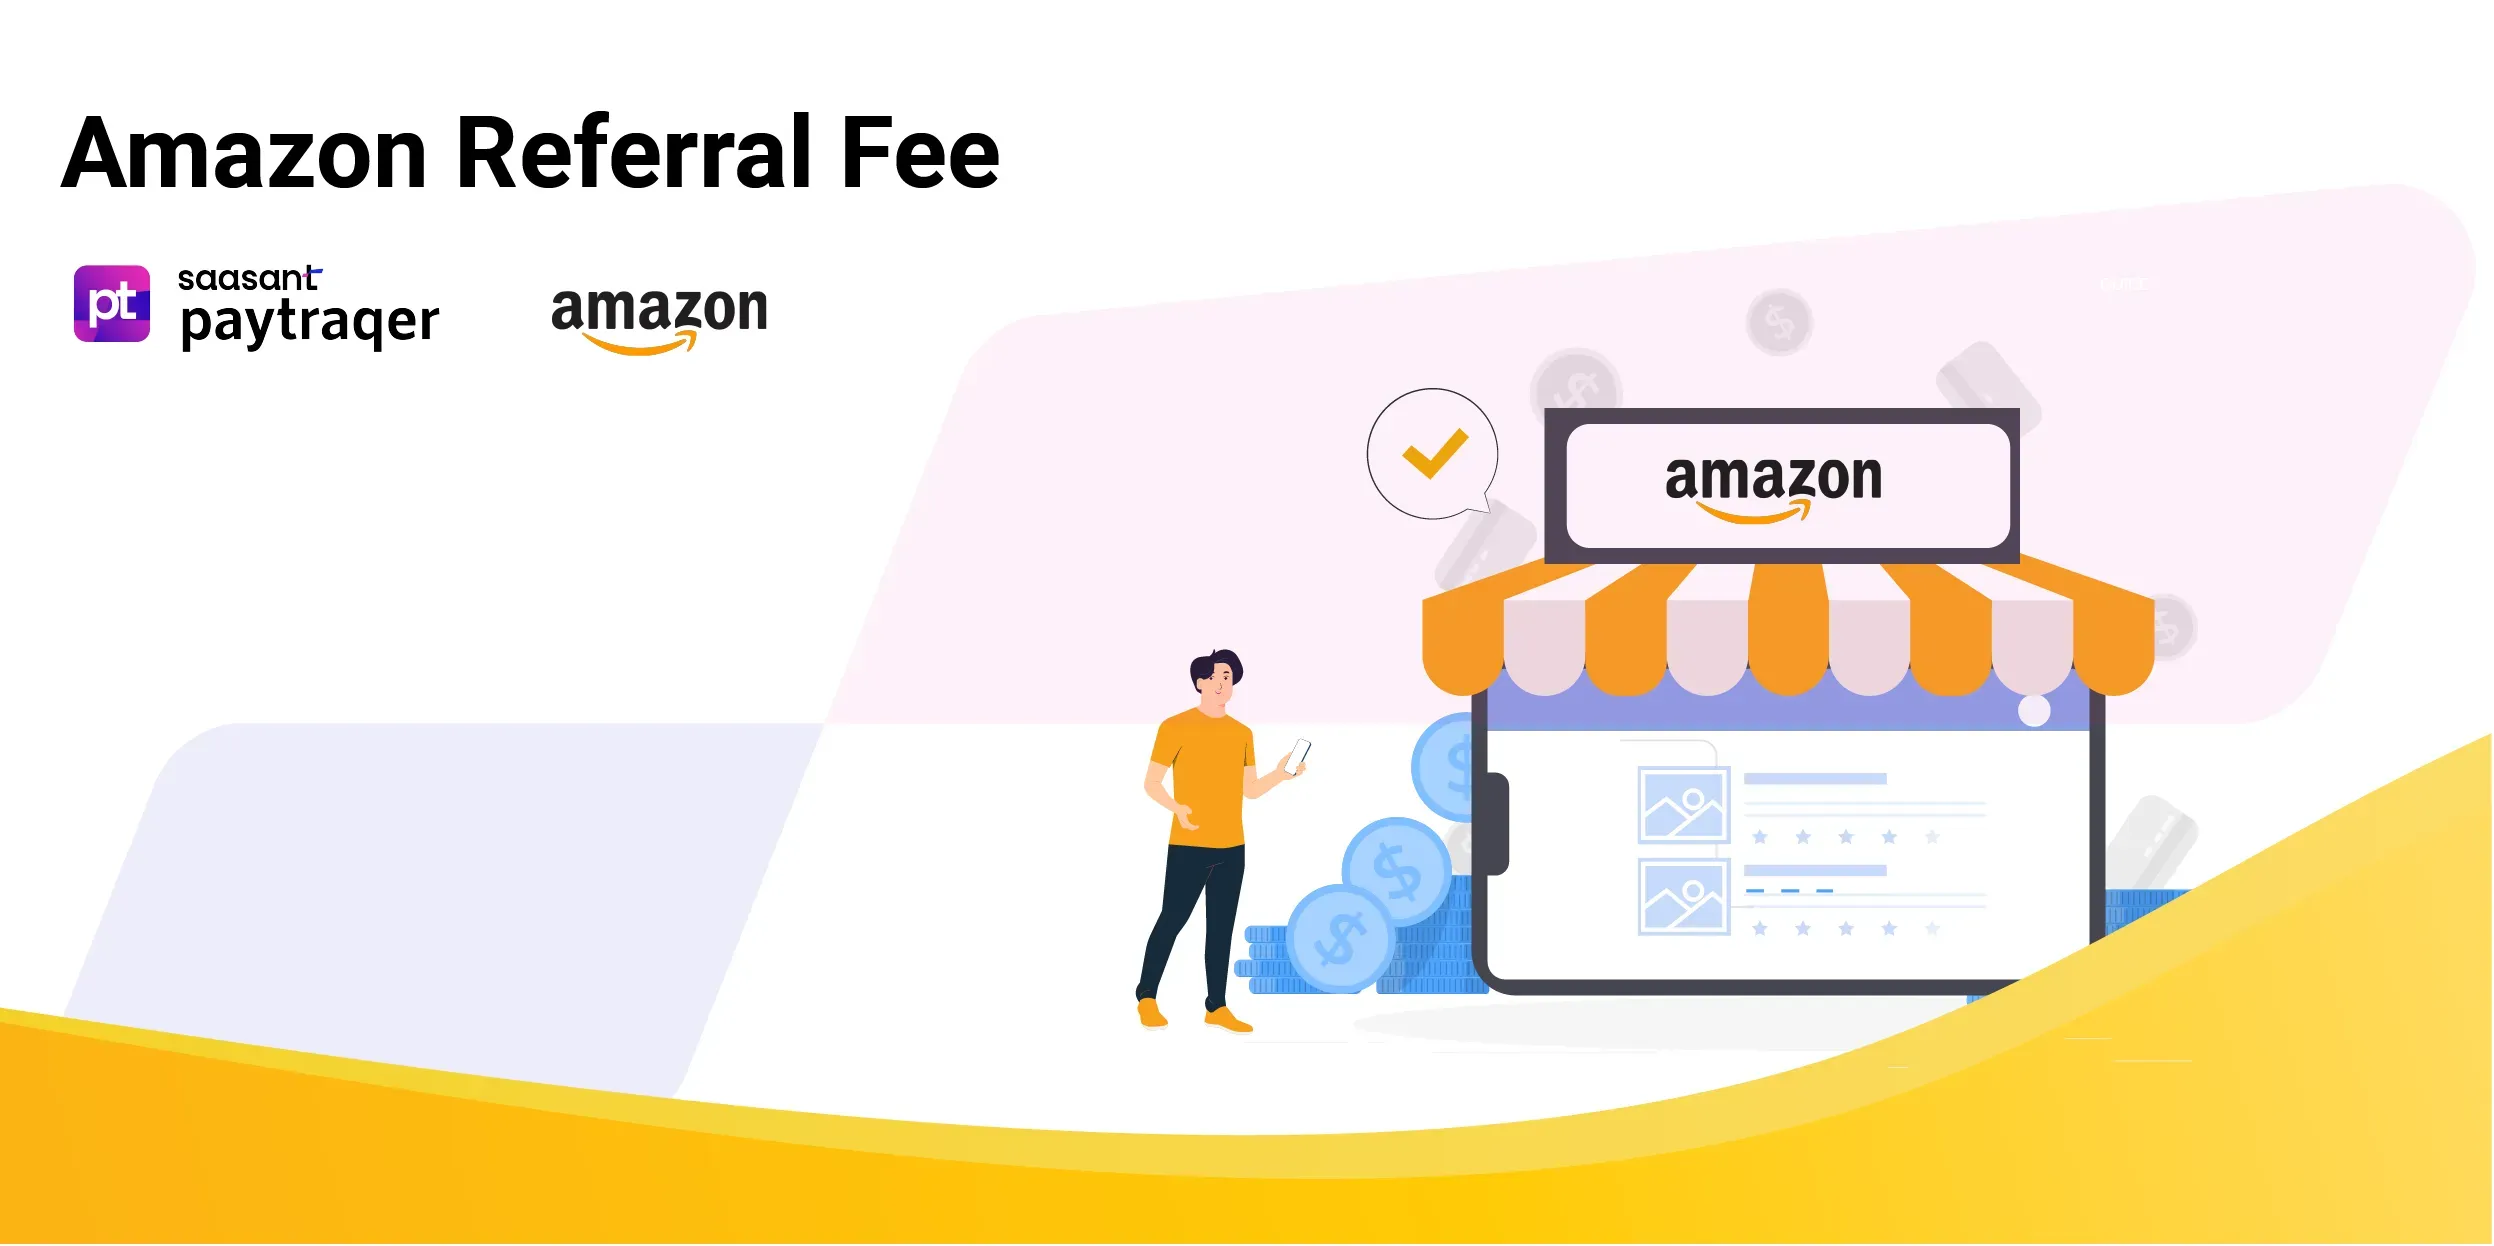 What is Amazon Referral Fee